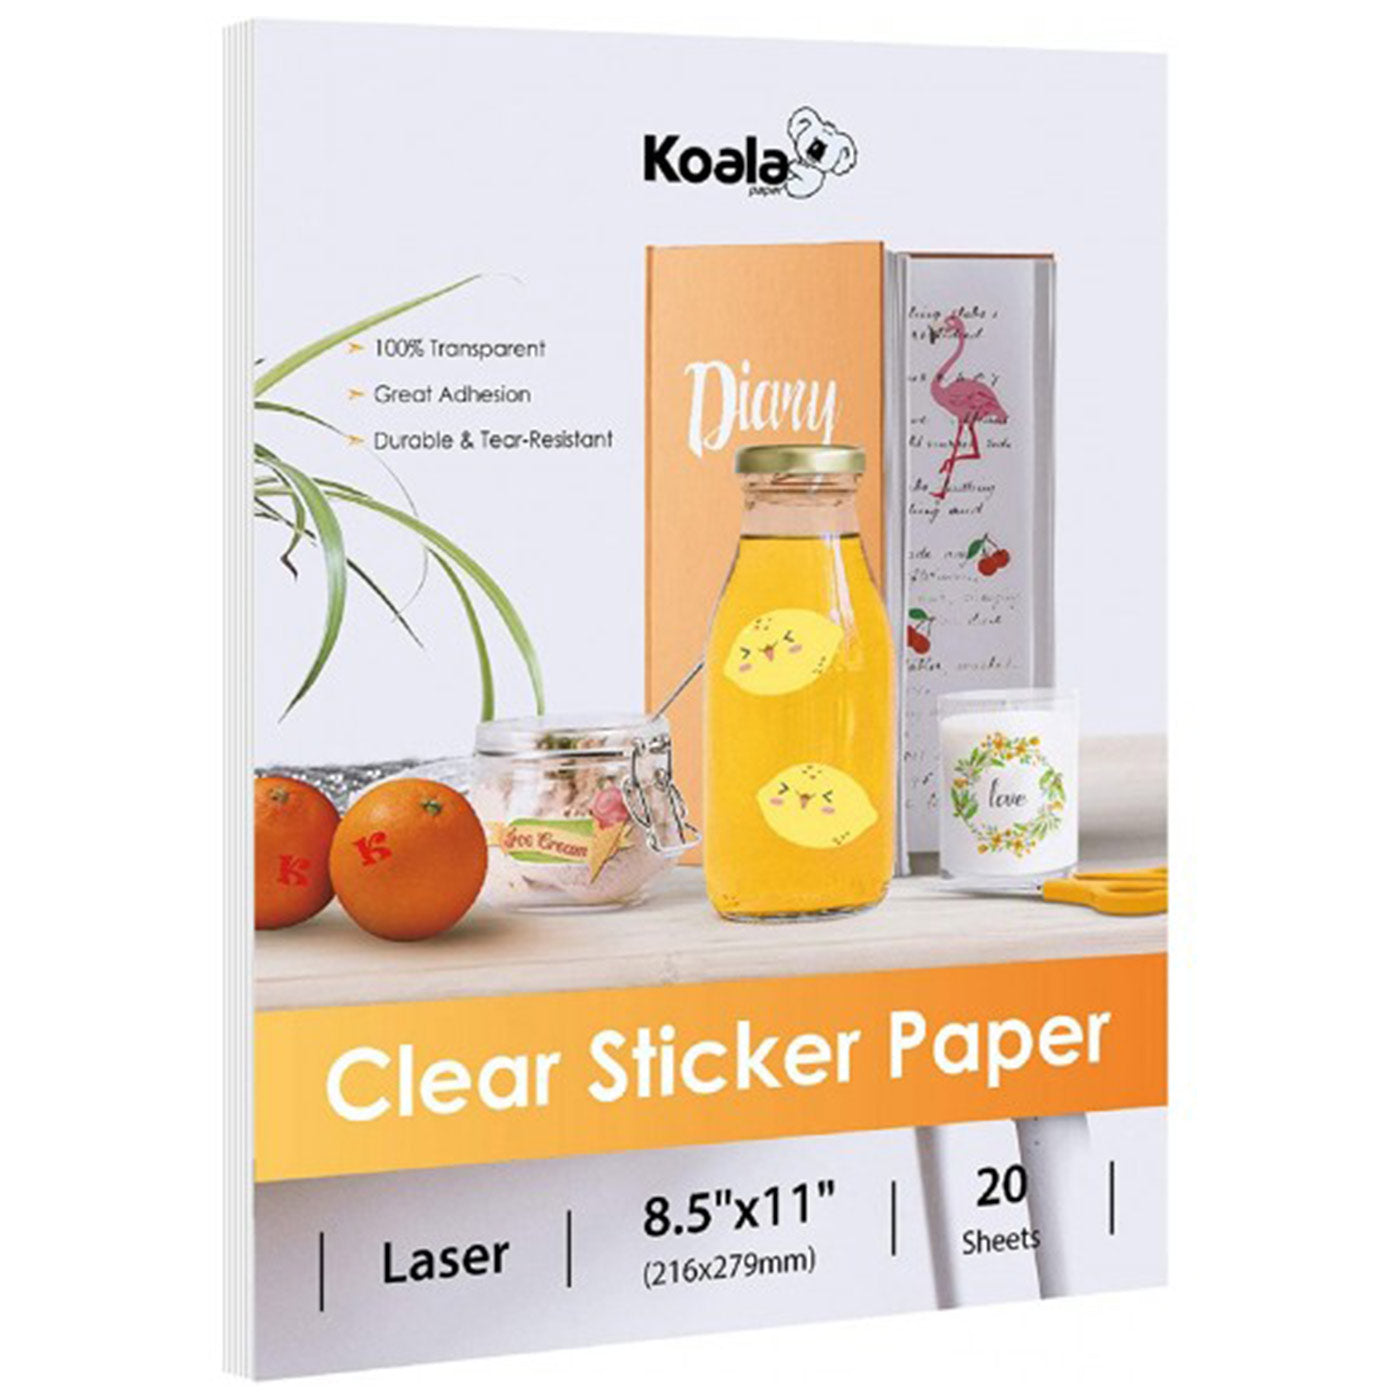 Koala Waterproof Printable Clear Sticker Paper for Laser Printers 8.5x11 inches 20 Sheets